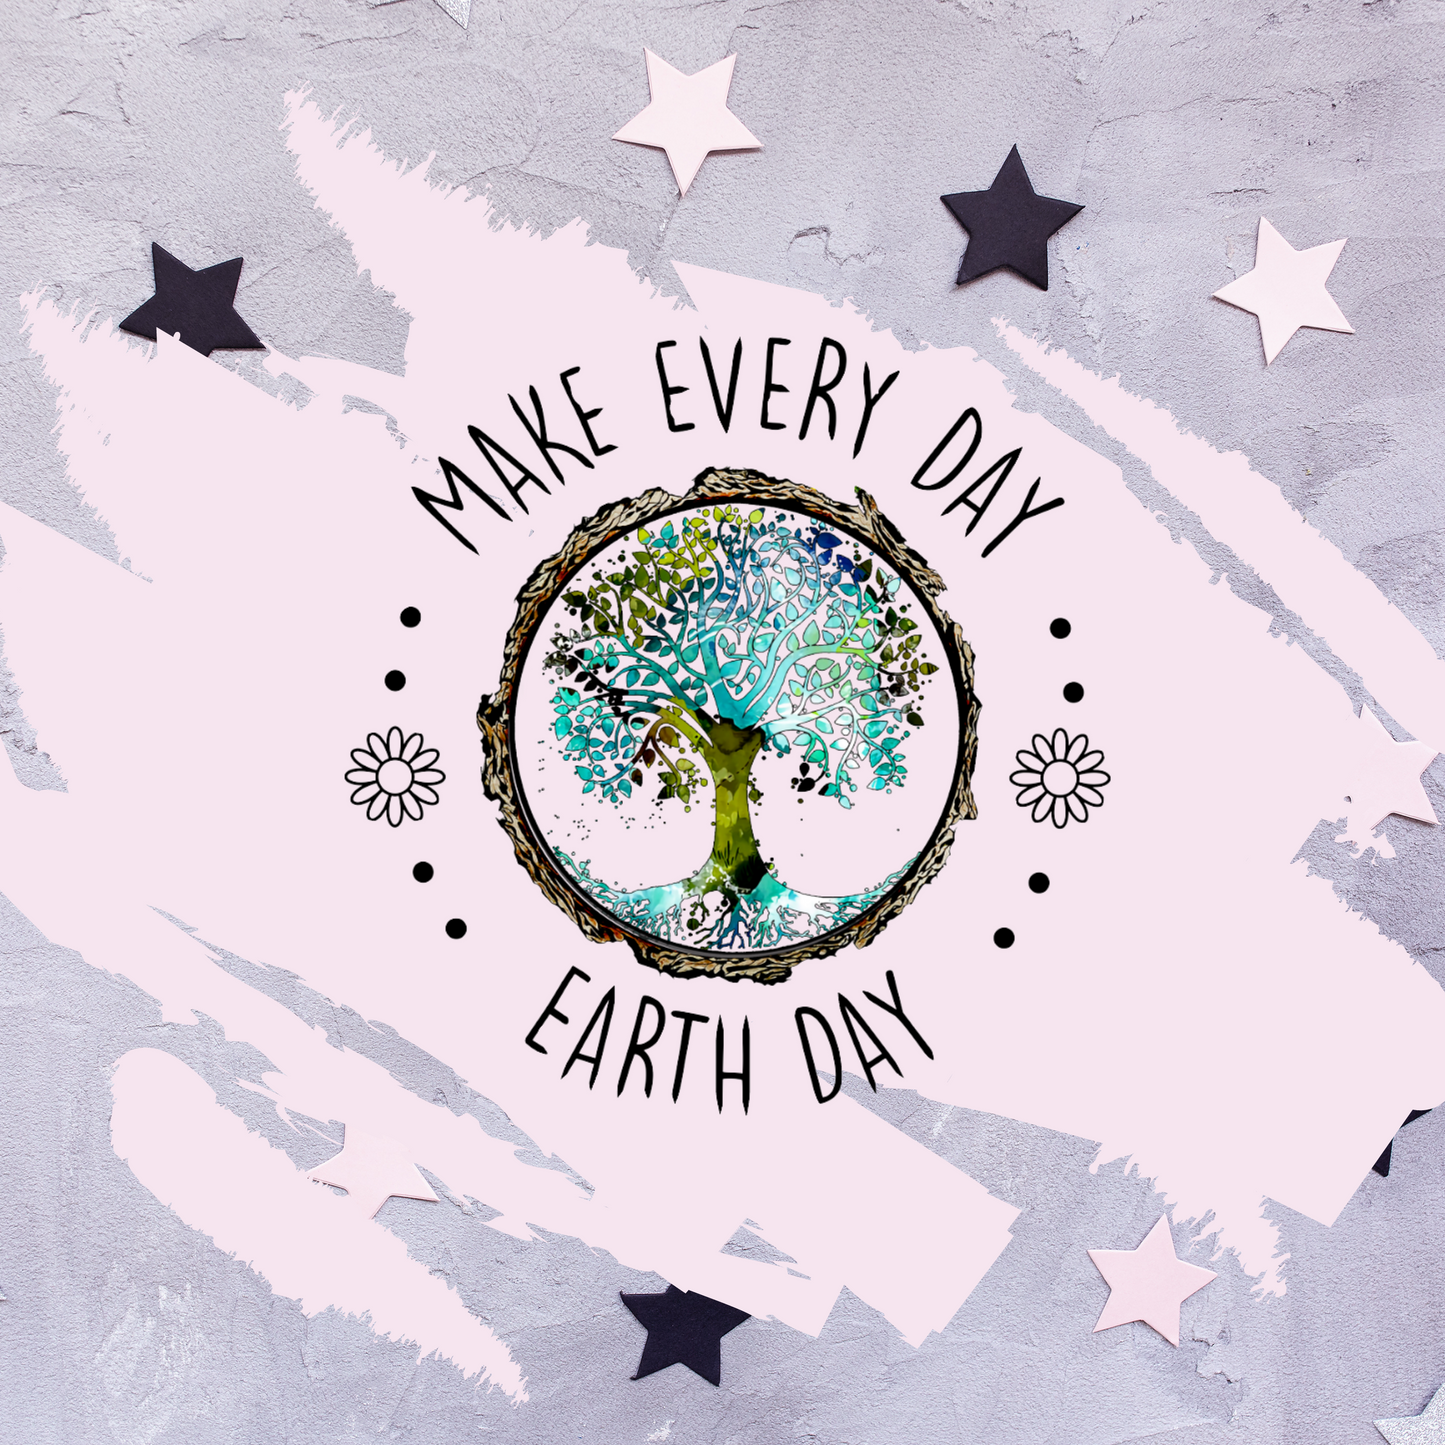 Earth Day Stickers, Climate Stickers, Charity Stickers, Environment Stickers, Change Stickers, Planner Stickers